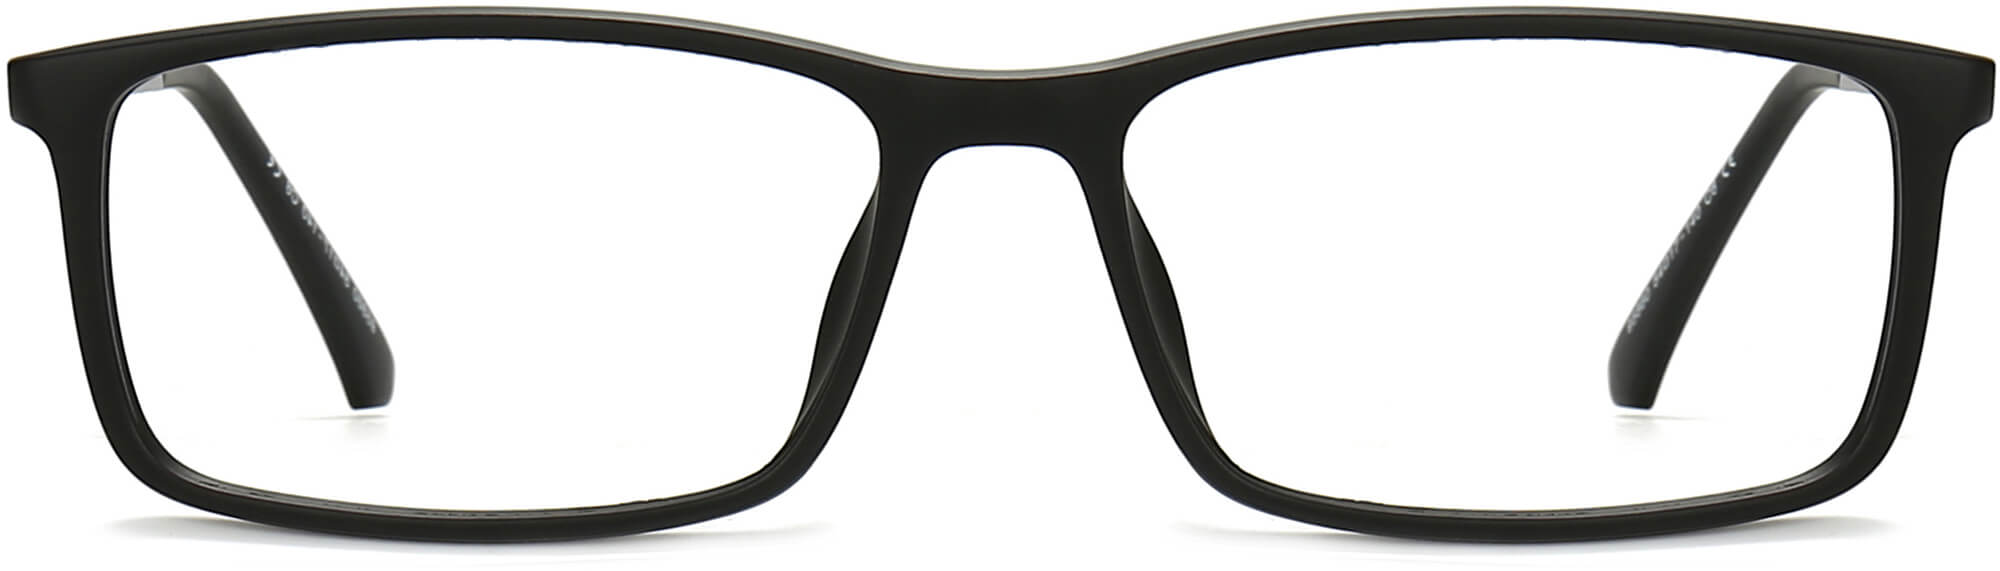 Cason Rectangle Black Eyeglasses from ANRRI, front view